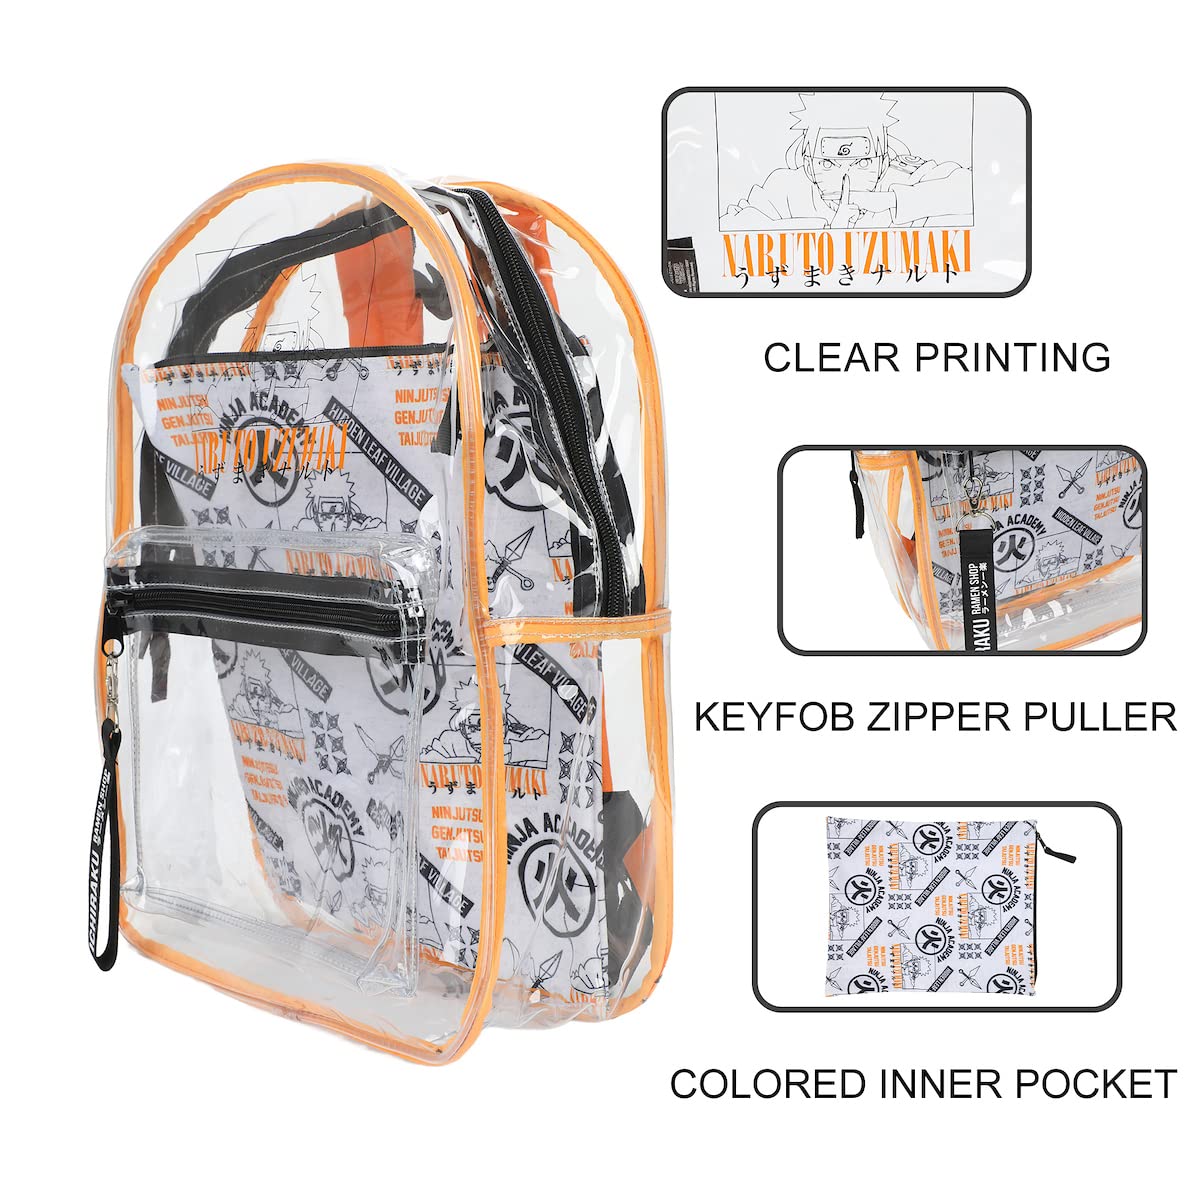 Naruto Shippuden 17" Clear Plastic Backpack with Removable Laptop Pocket